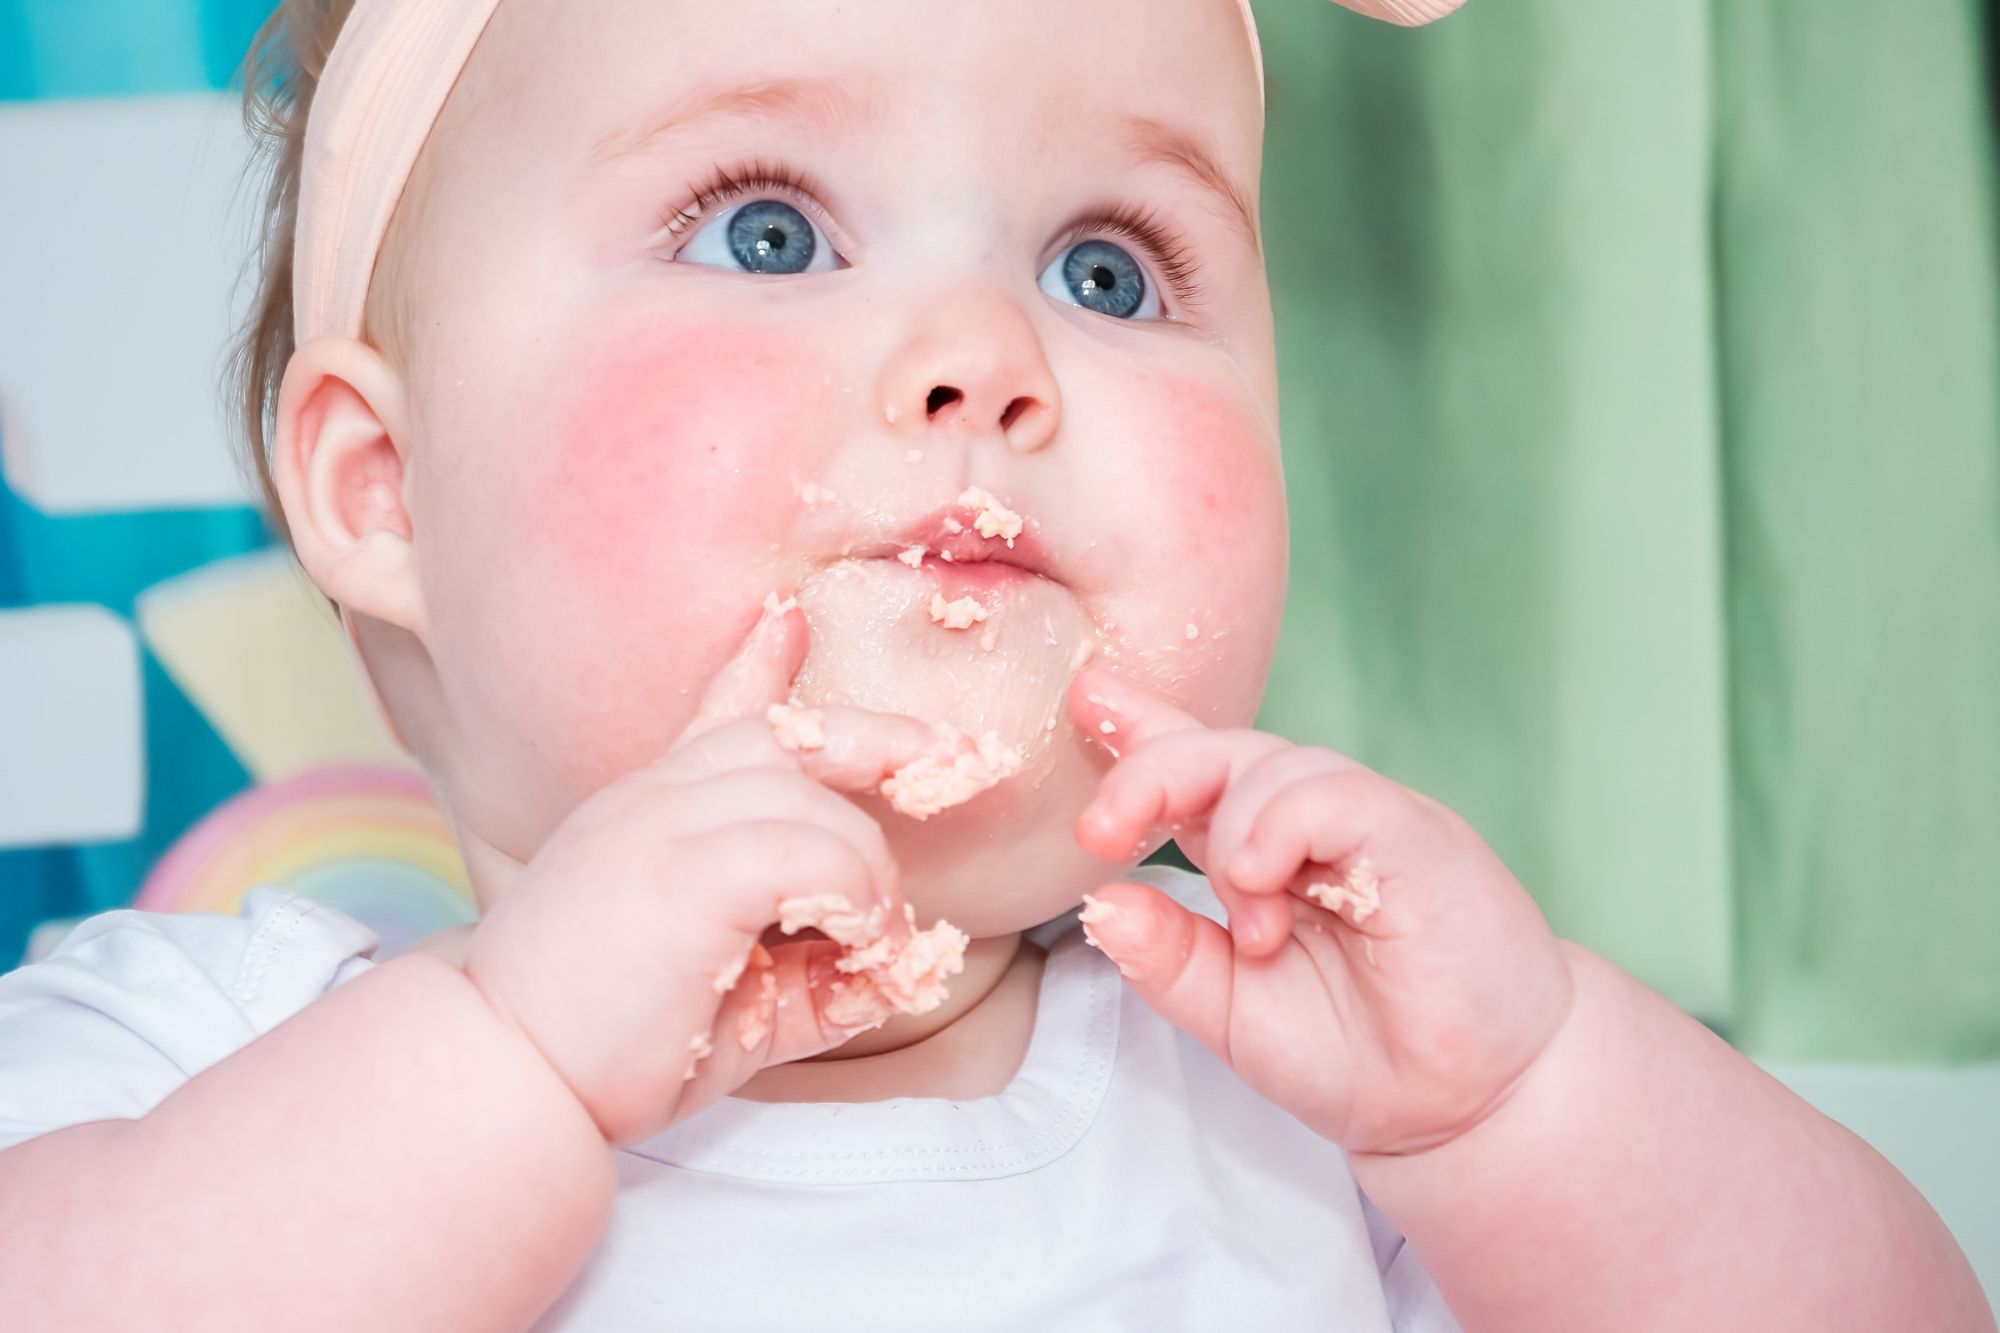 A close up of a little girl's face at her cake smash session. She has icing on her lips and fingers